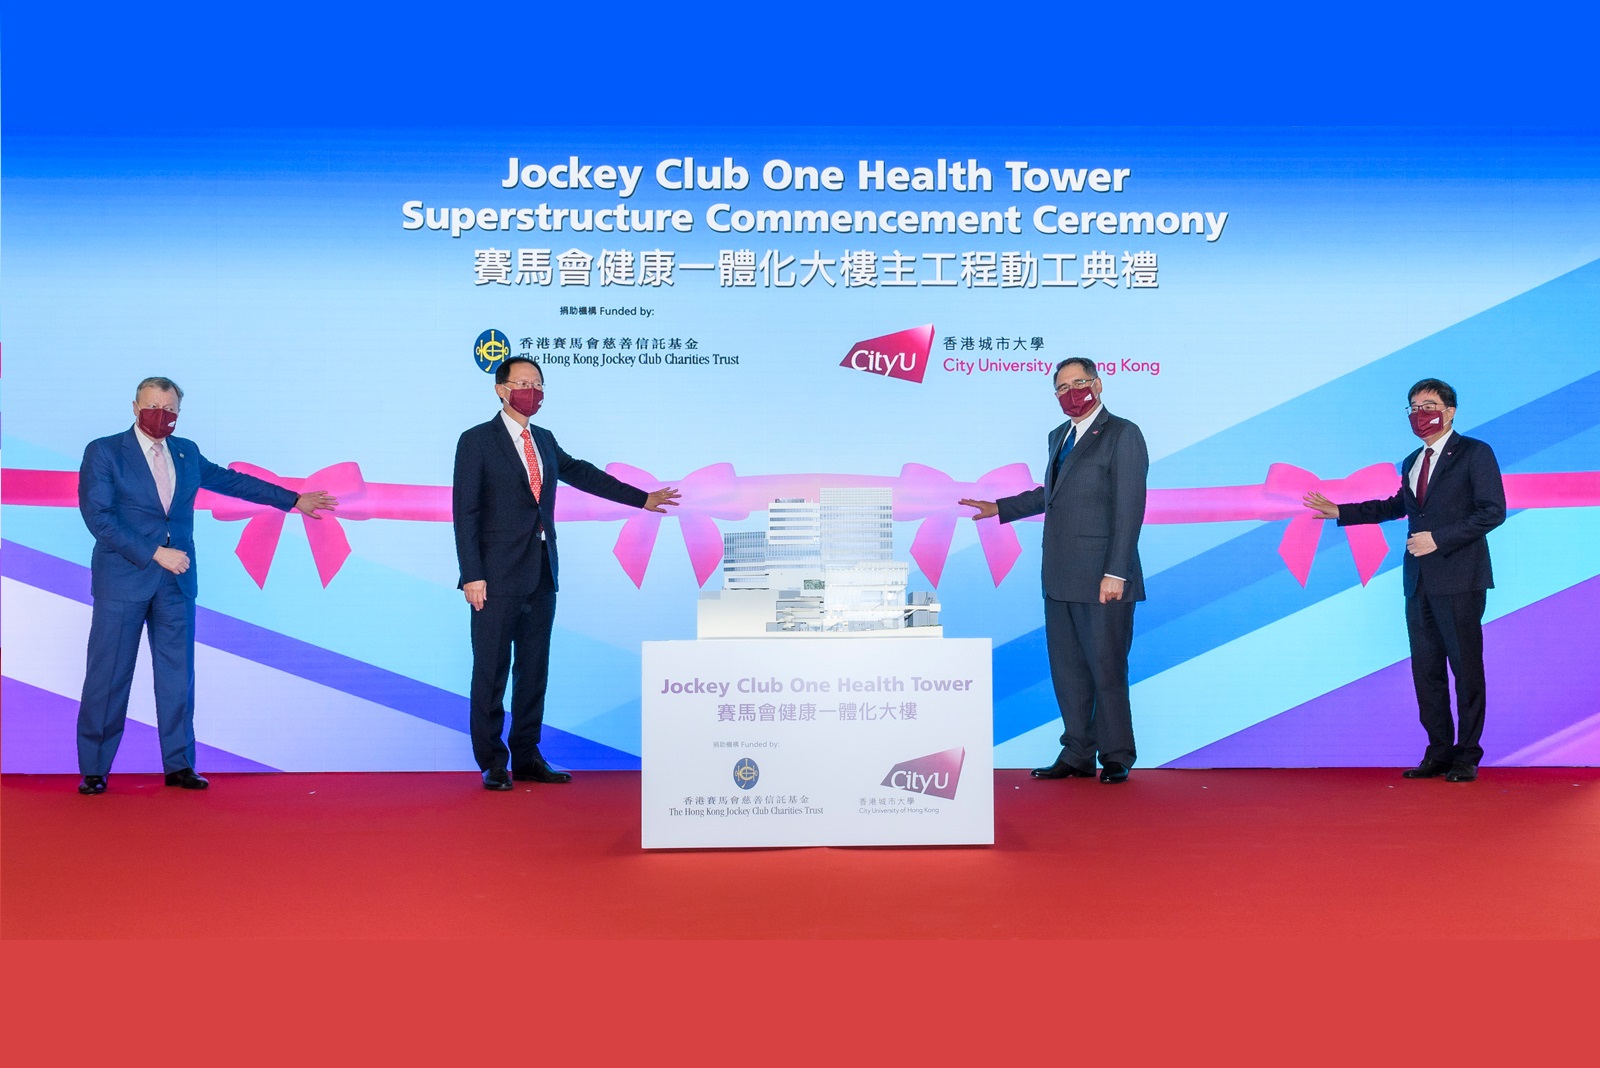 Jockey Club One Health Tower Superstructure Commencement Ceremony